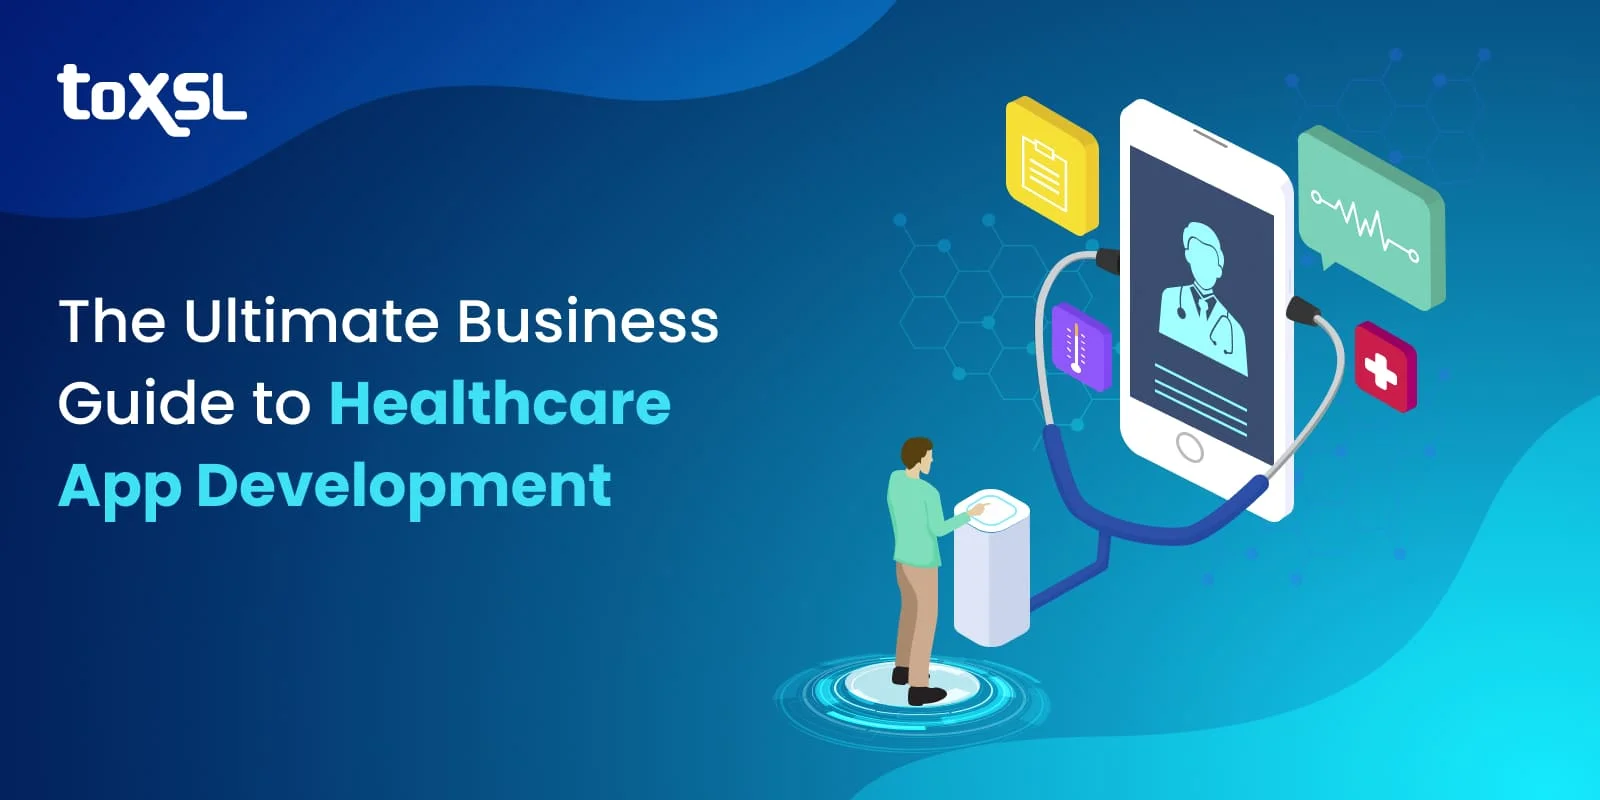 The Ultimate Business Guide to Healthcare Application Development